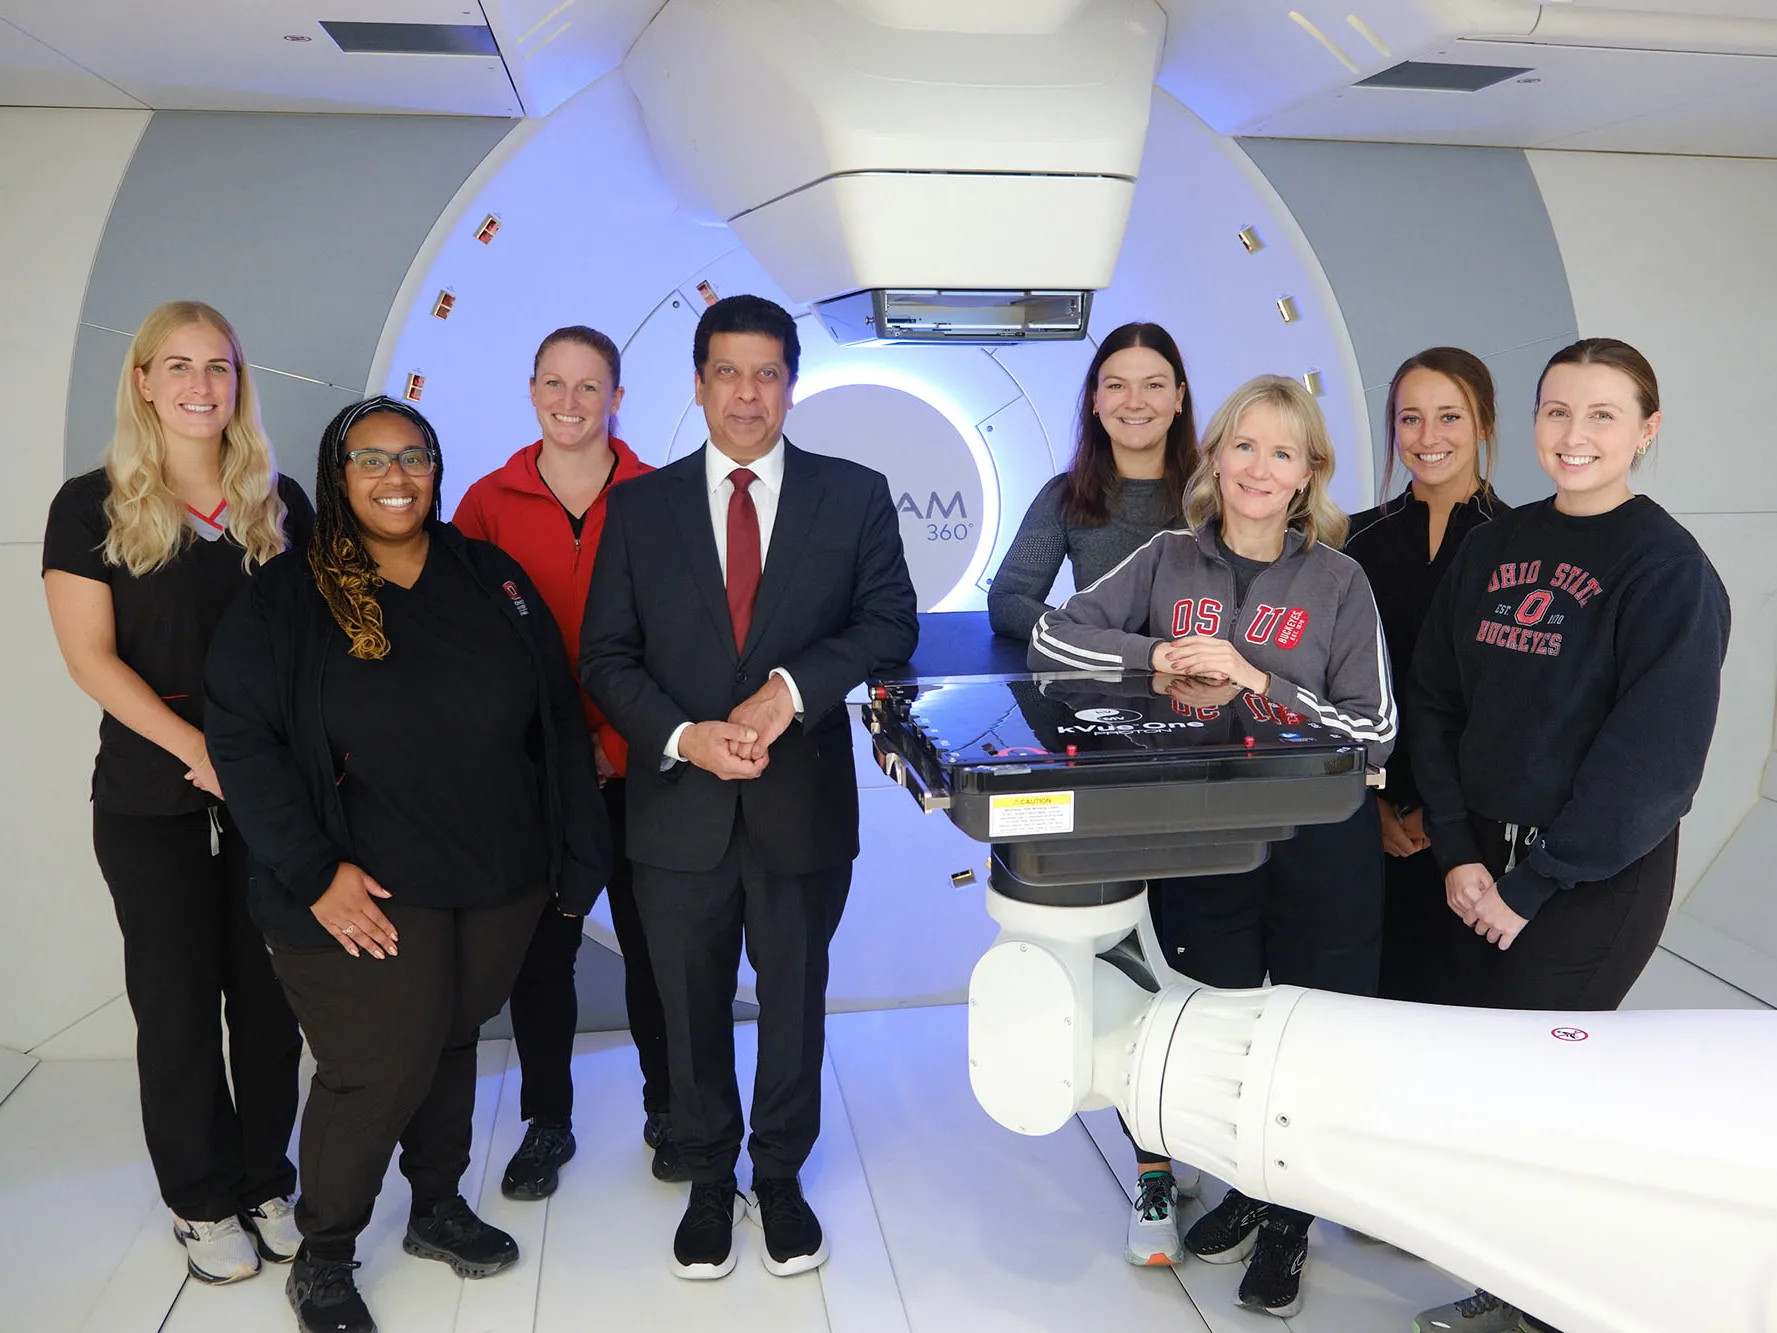 A team of people who work at Ohio State’s proton therapy center pose in the room where the treatment takes place. It is white-walled and appears spotless. They are eight smiling people—seven women—wearing scrubs or Ohio State sweatshirts. Dr. Arnab Chakravarti stands near the center in a suit.